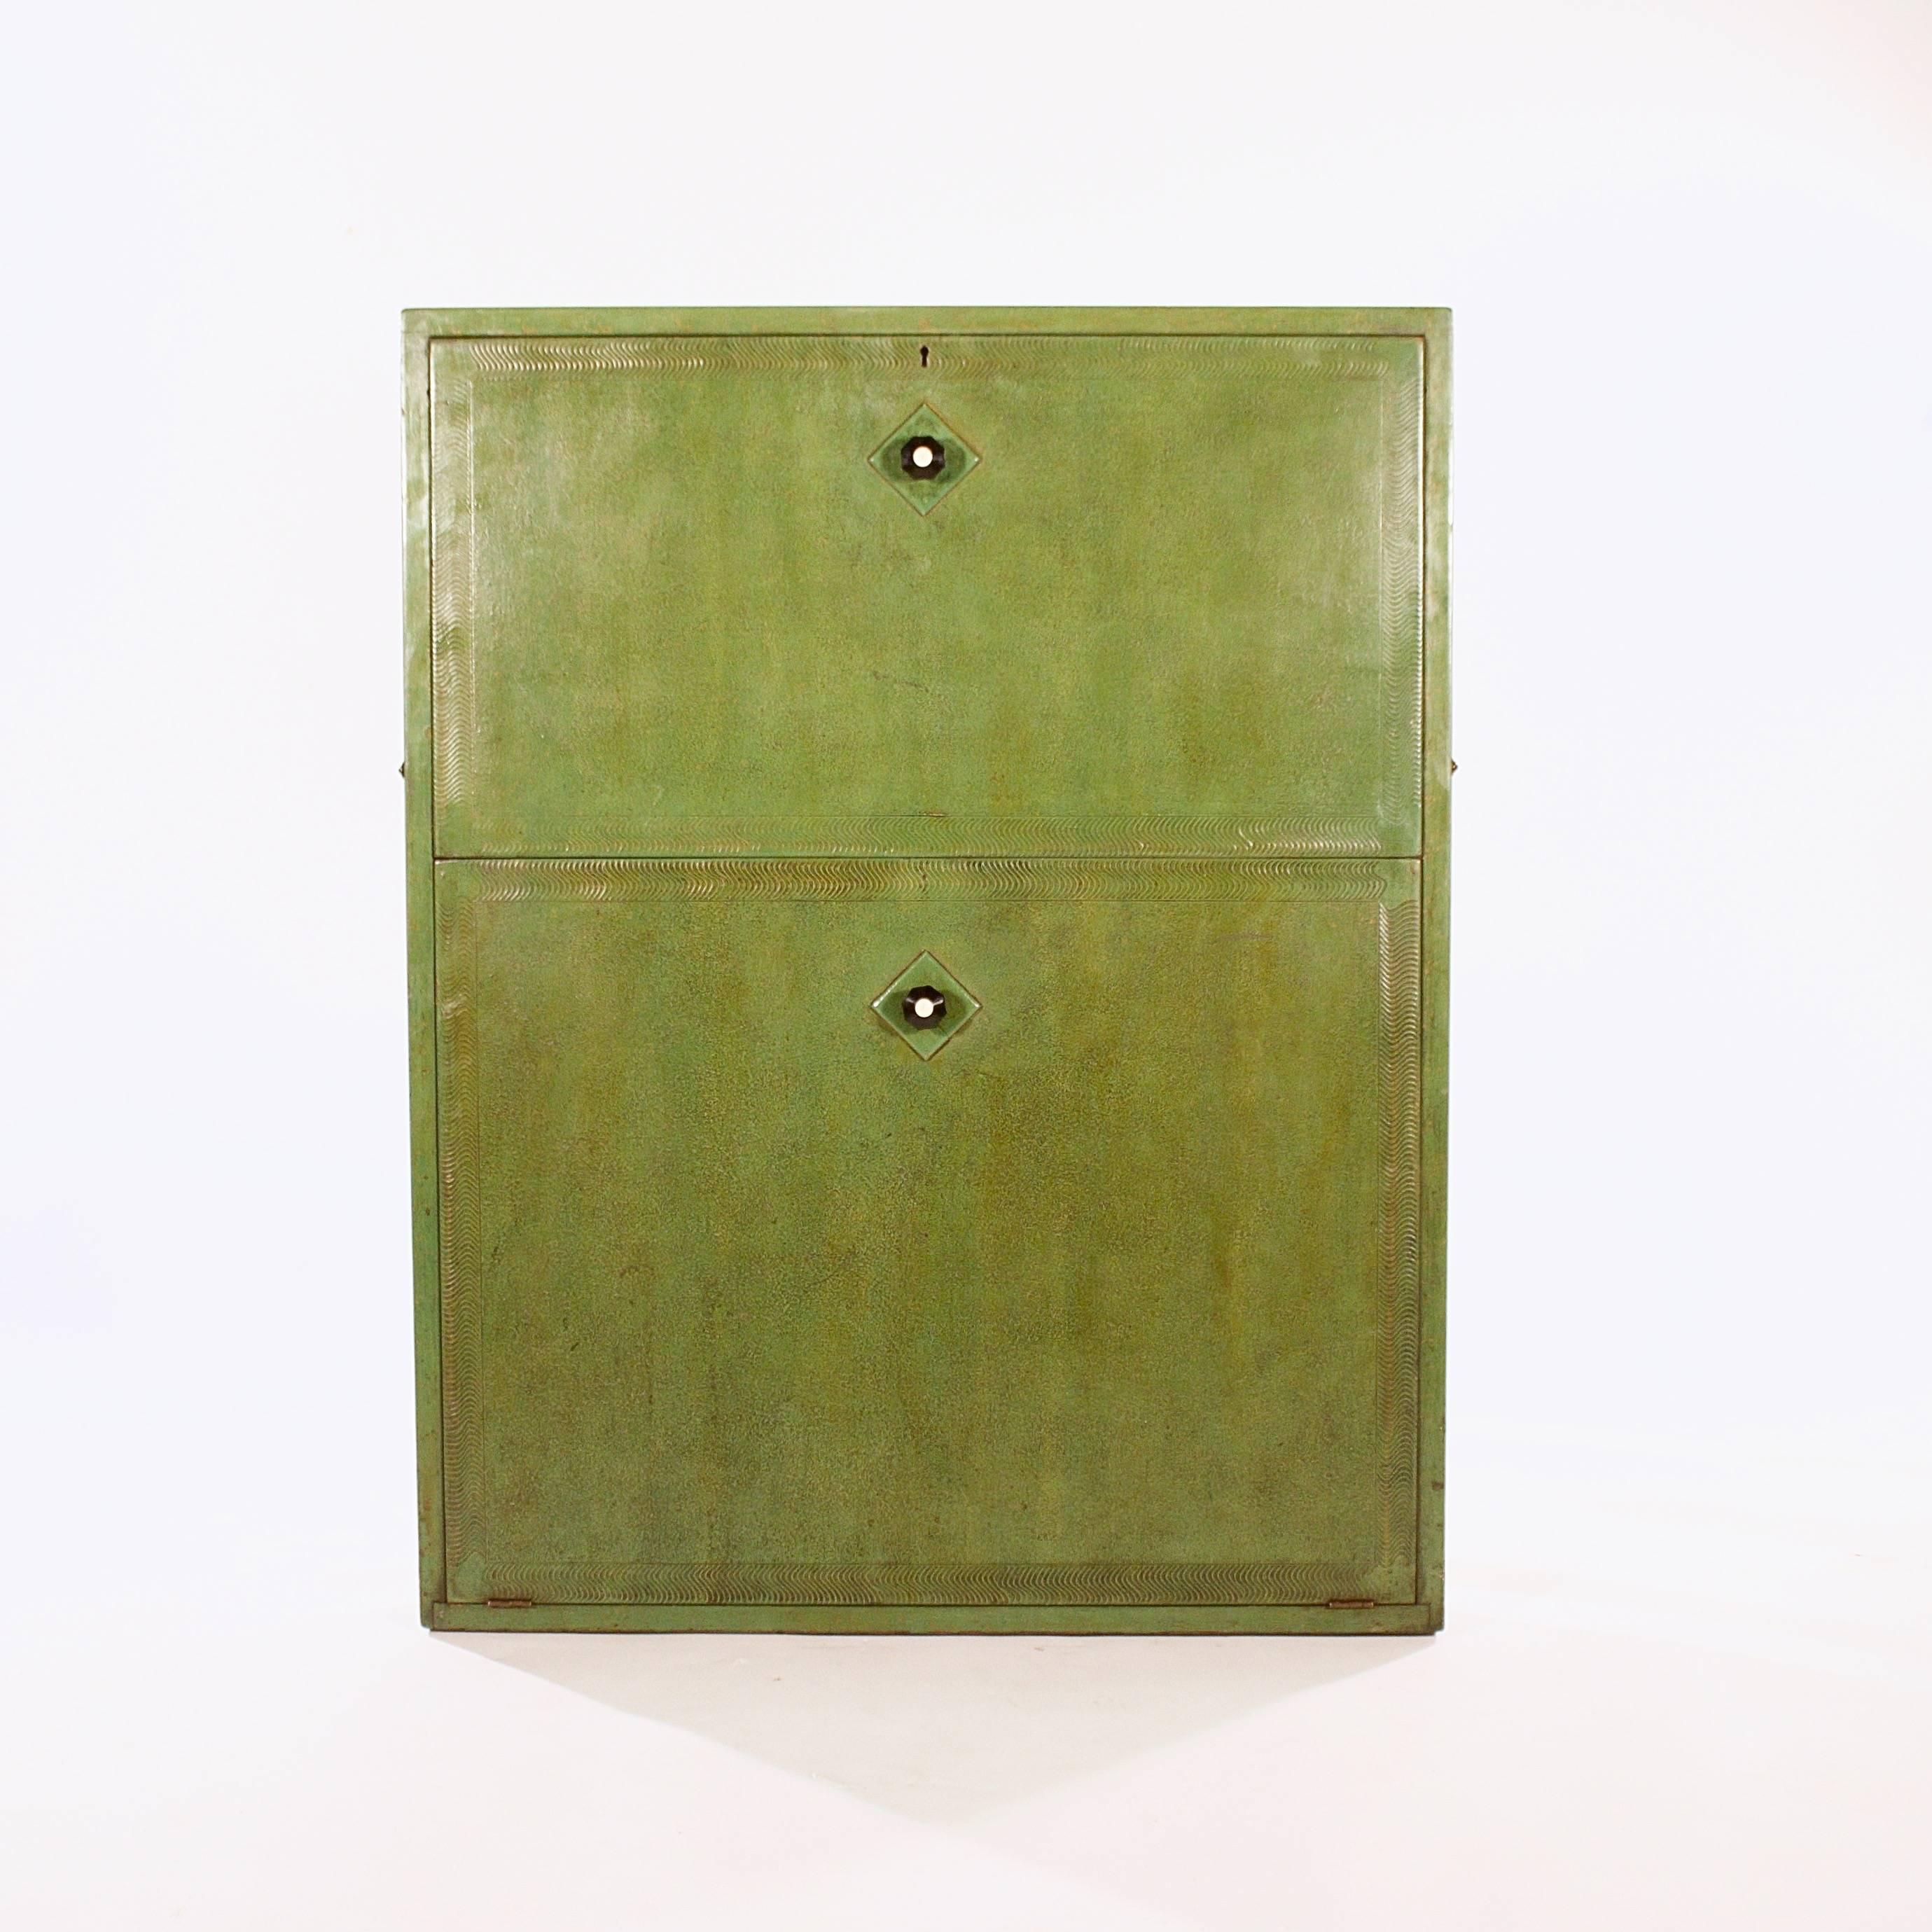 The front decorated with green stippled paint and pressed ripple borders enclosing a fitted interior to the fold-down top section and storage compartment to the bottom. Both the top and bottom sections with the original Bakelite handles.

With the